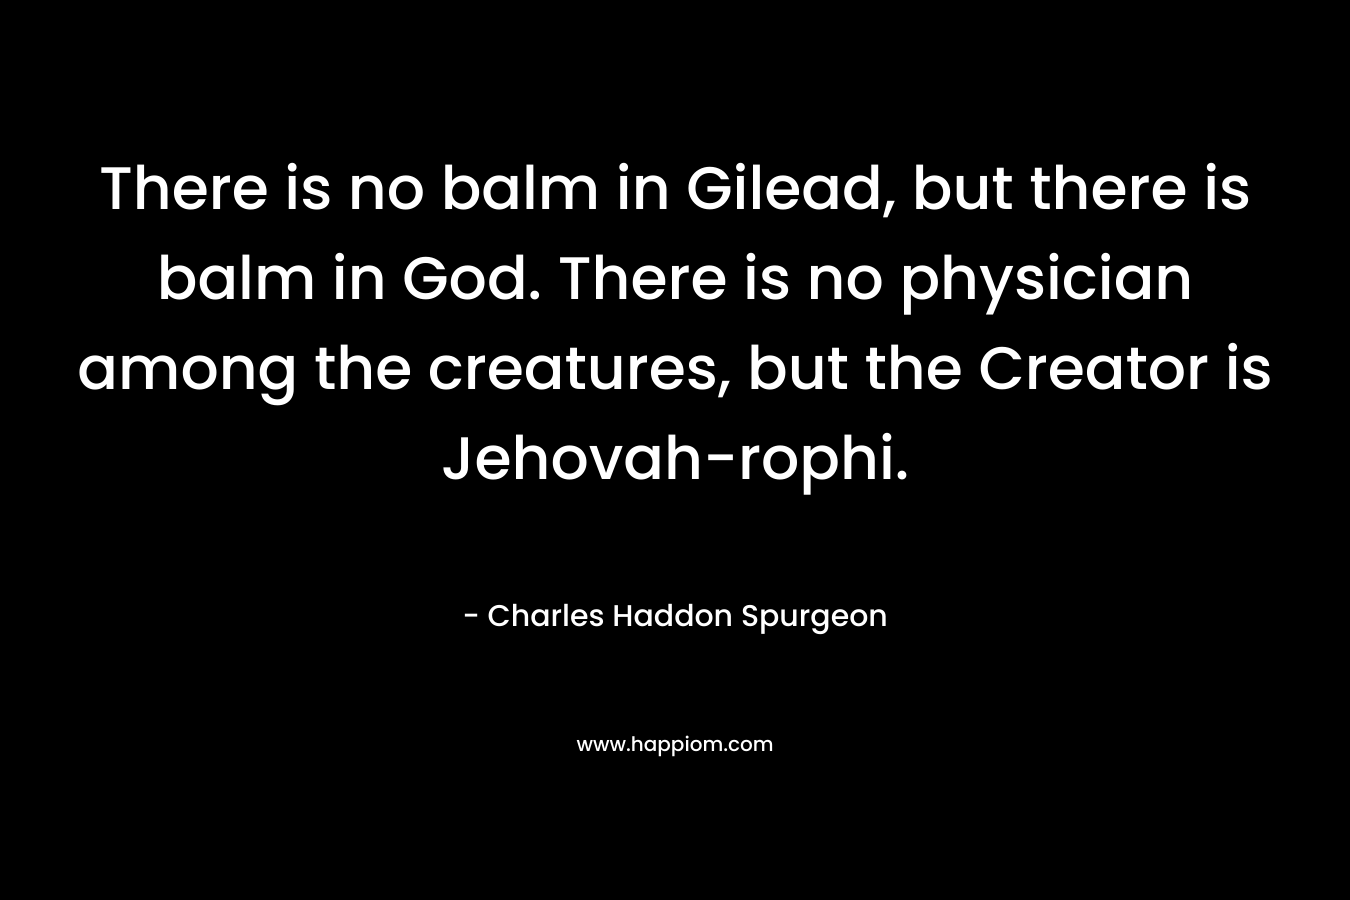 There is no balm in Gilead, but there is balm in God. There is no physician among the creatures, but the Creator is Jehovah-rophi.